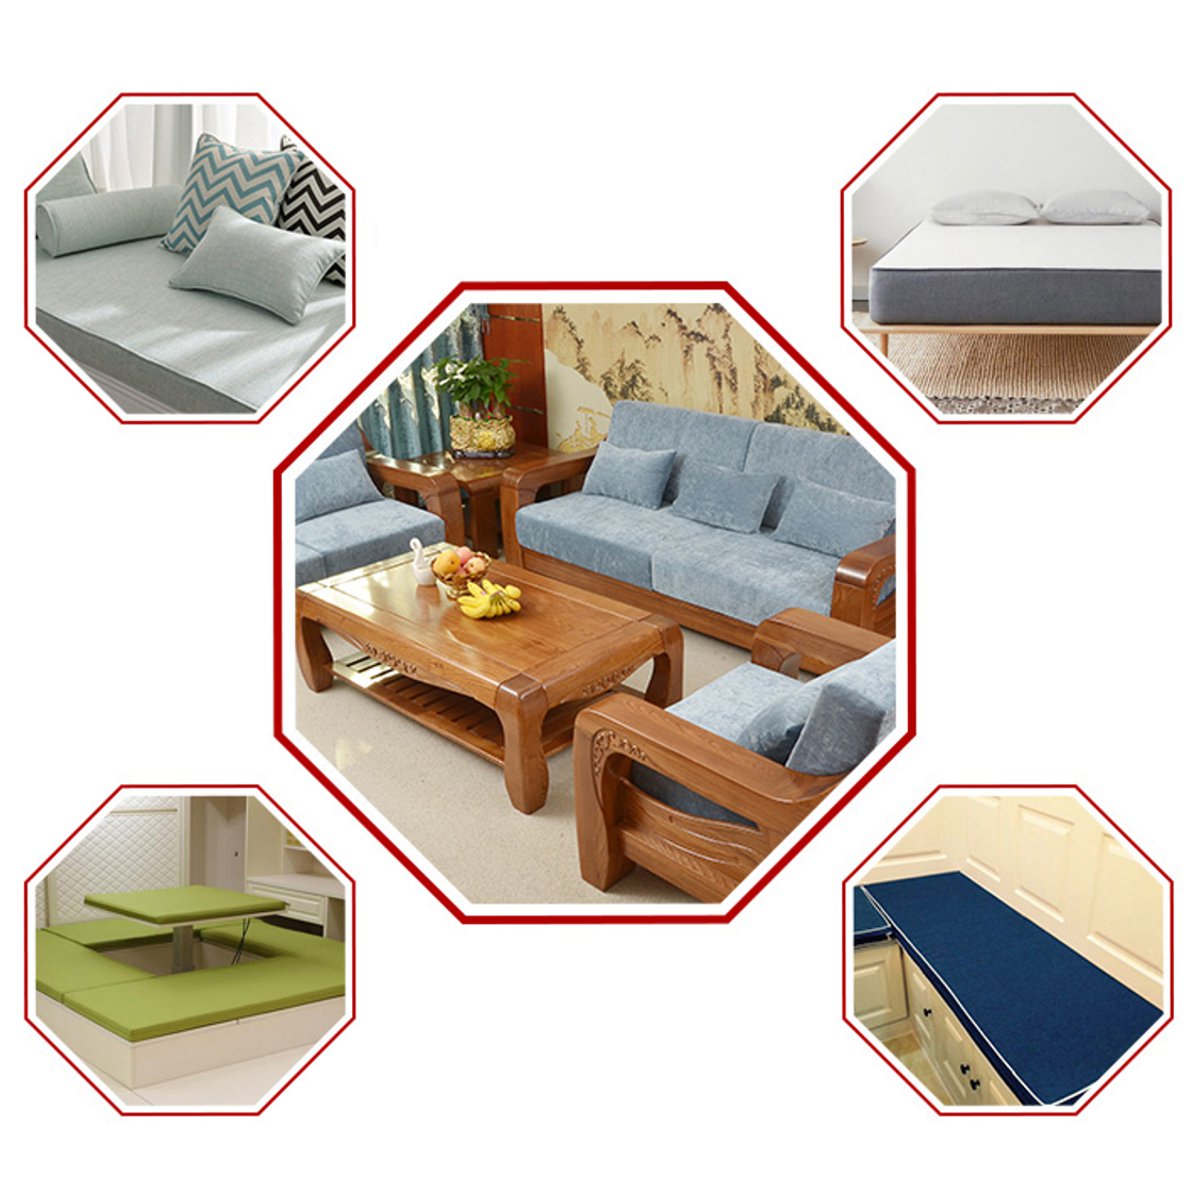 60x60cm-High-Density-Upholstery-Foam-Cushions-Seat-Pad-Sofa-Replacement-Cut-to-Any-Size-1302791-5